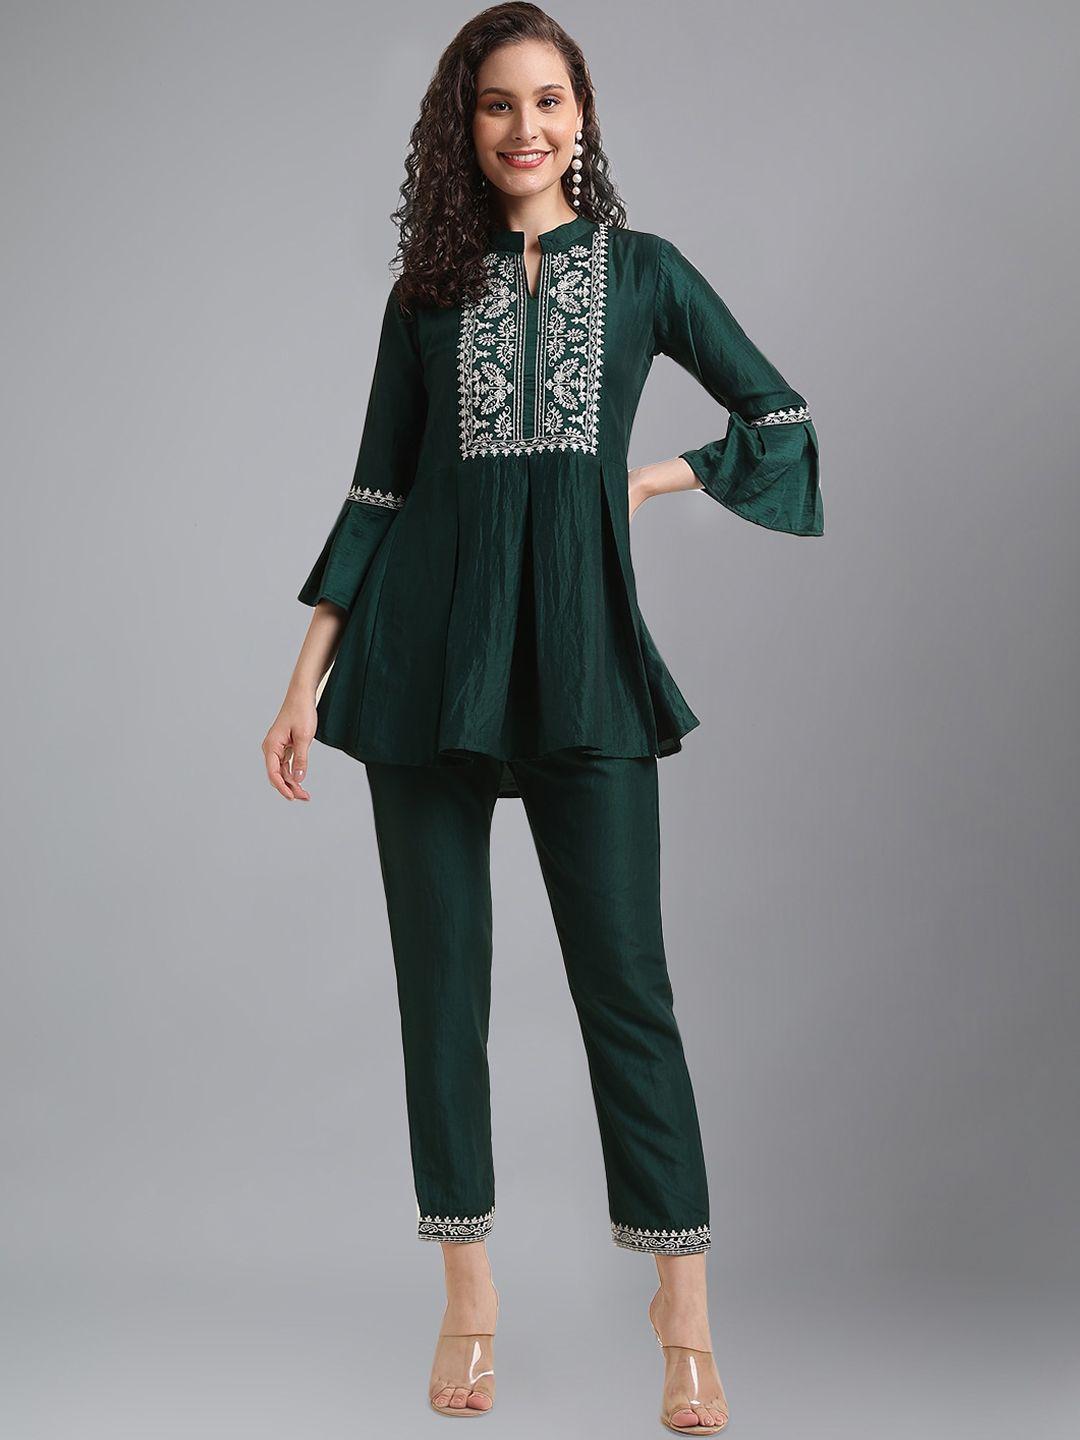 kalini embroidered mandarin collar top with mid-rise trouser